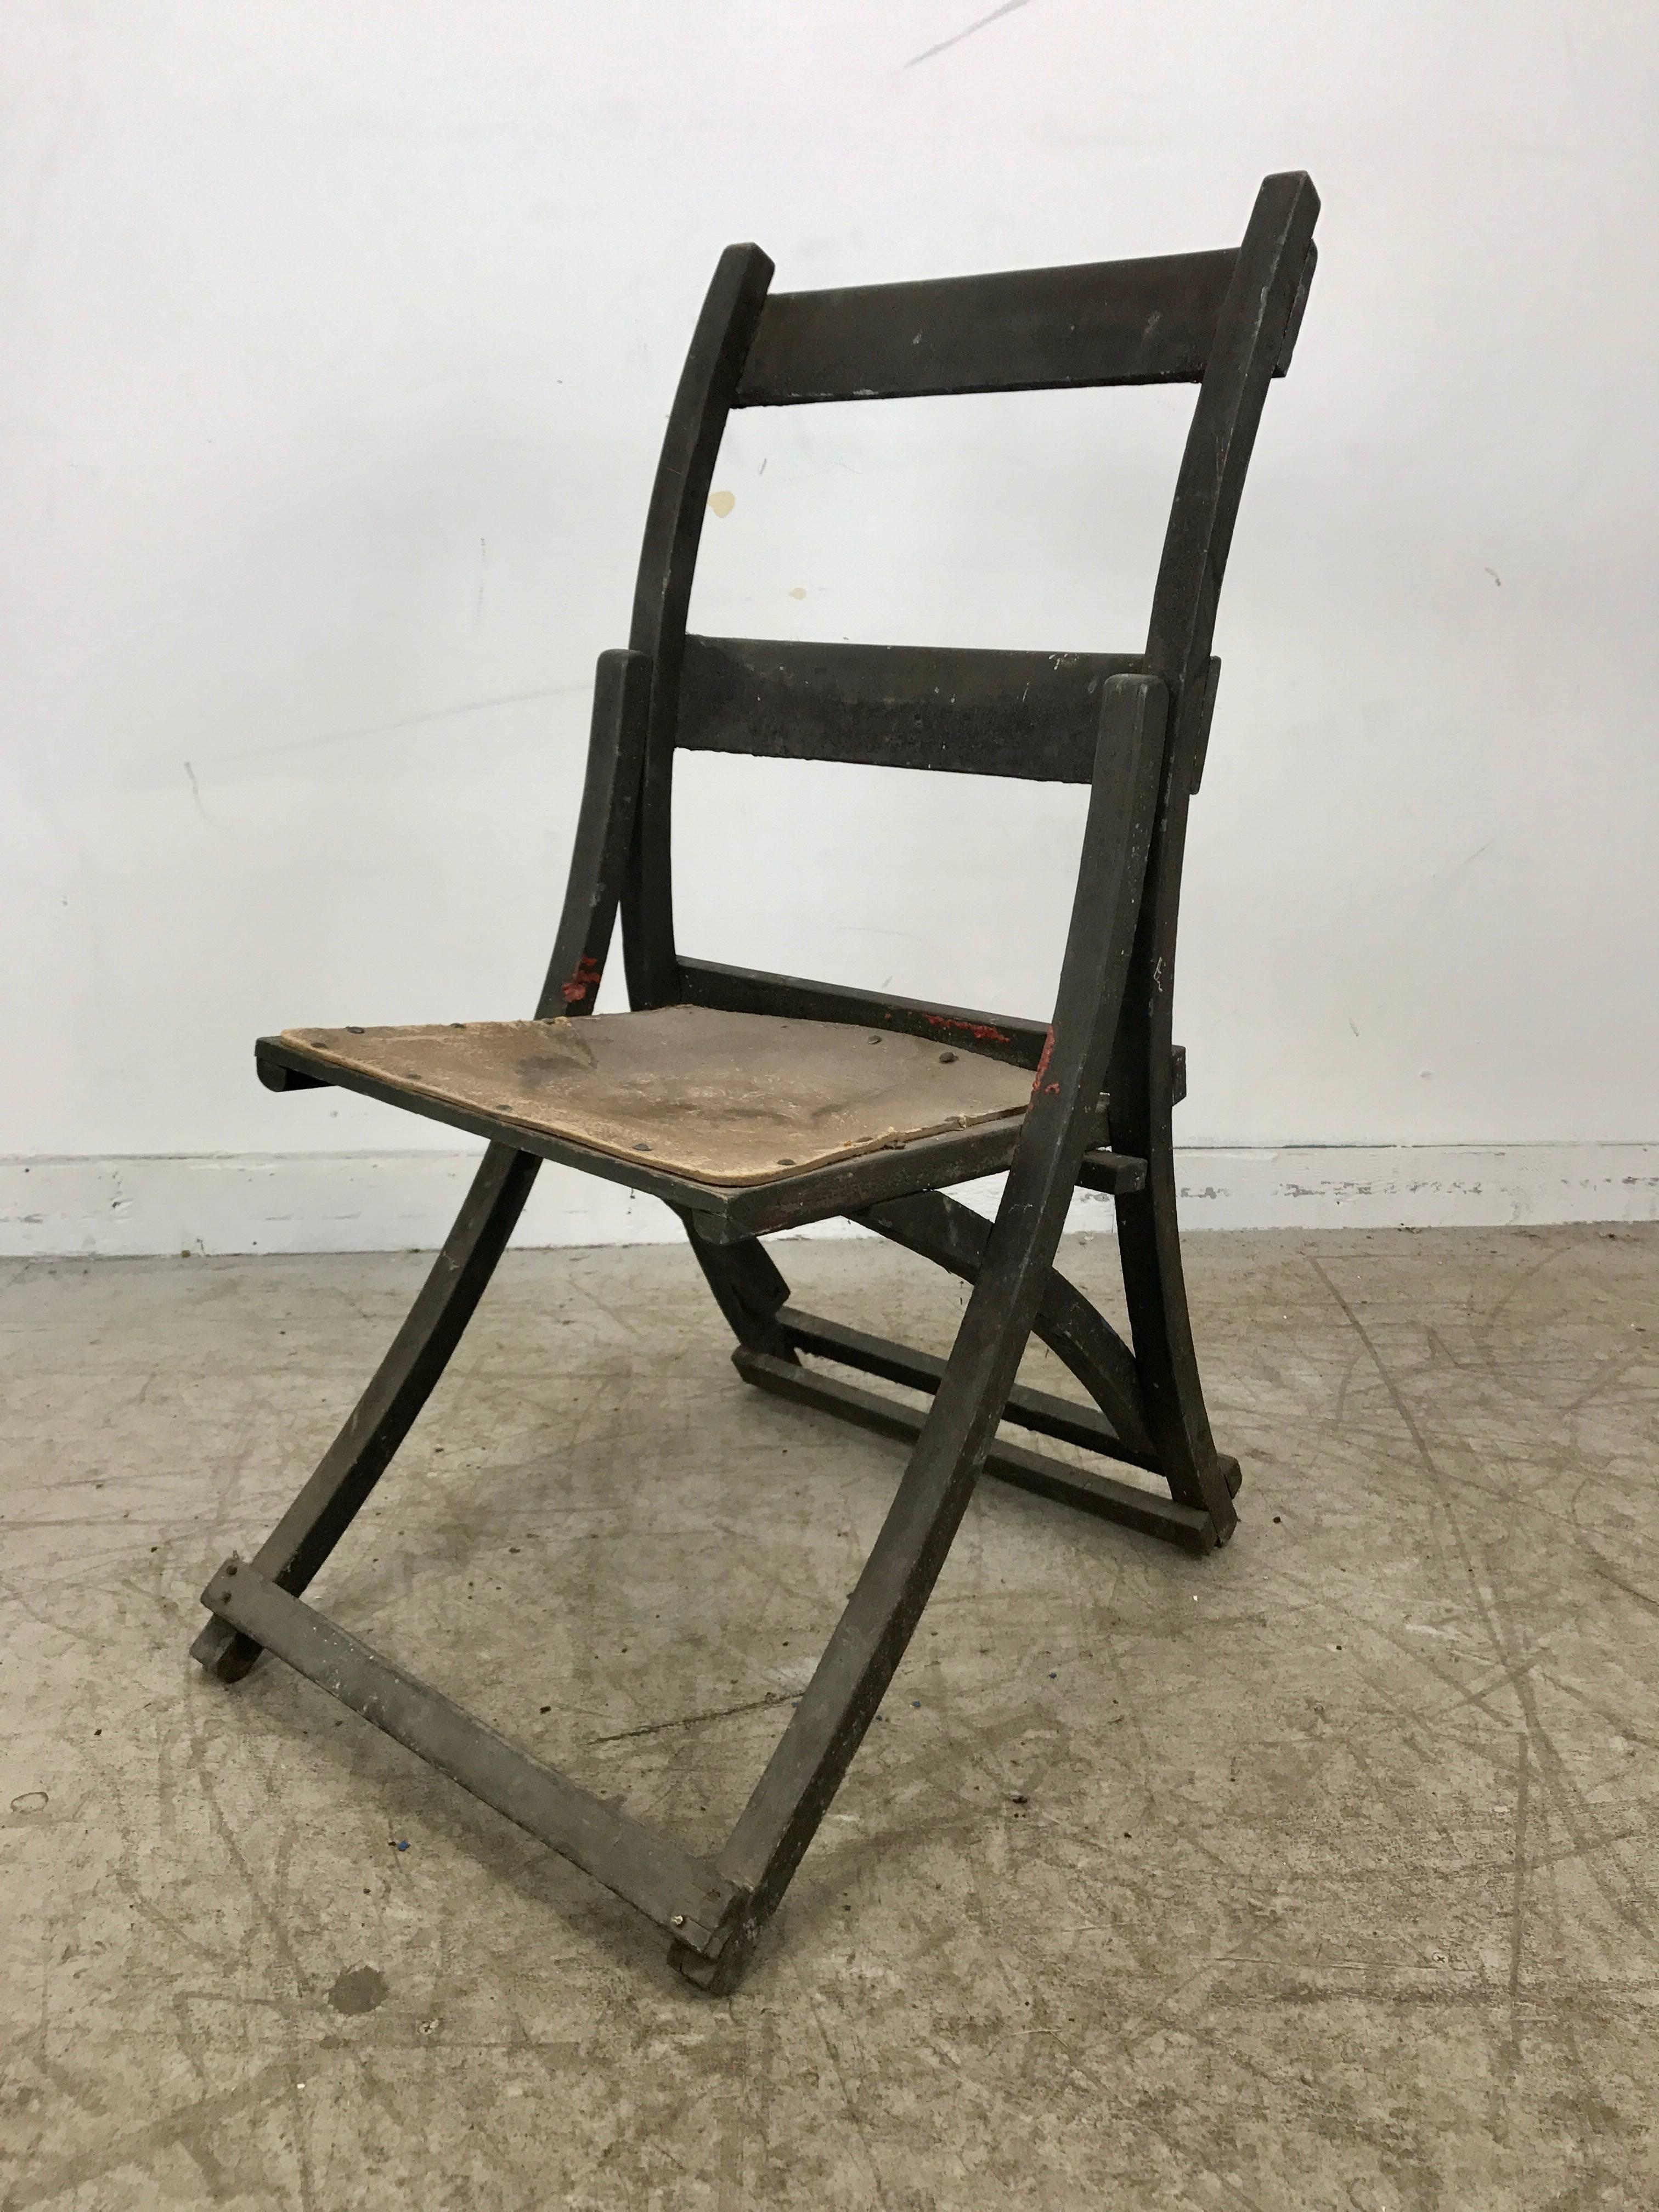 Early Sucsessionist Jugendstil folding chair in the manner of Richard Riemerschmid, unusual form, retains original patina.